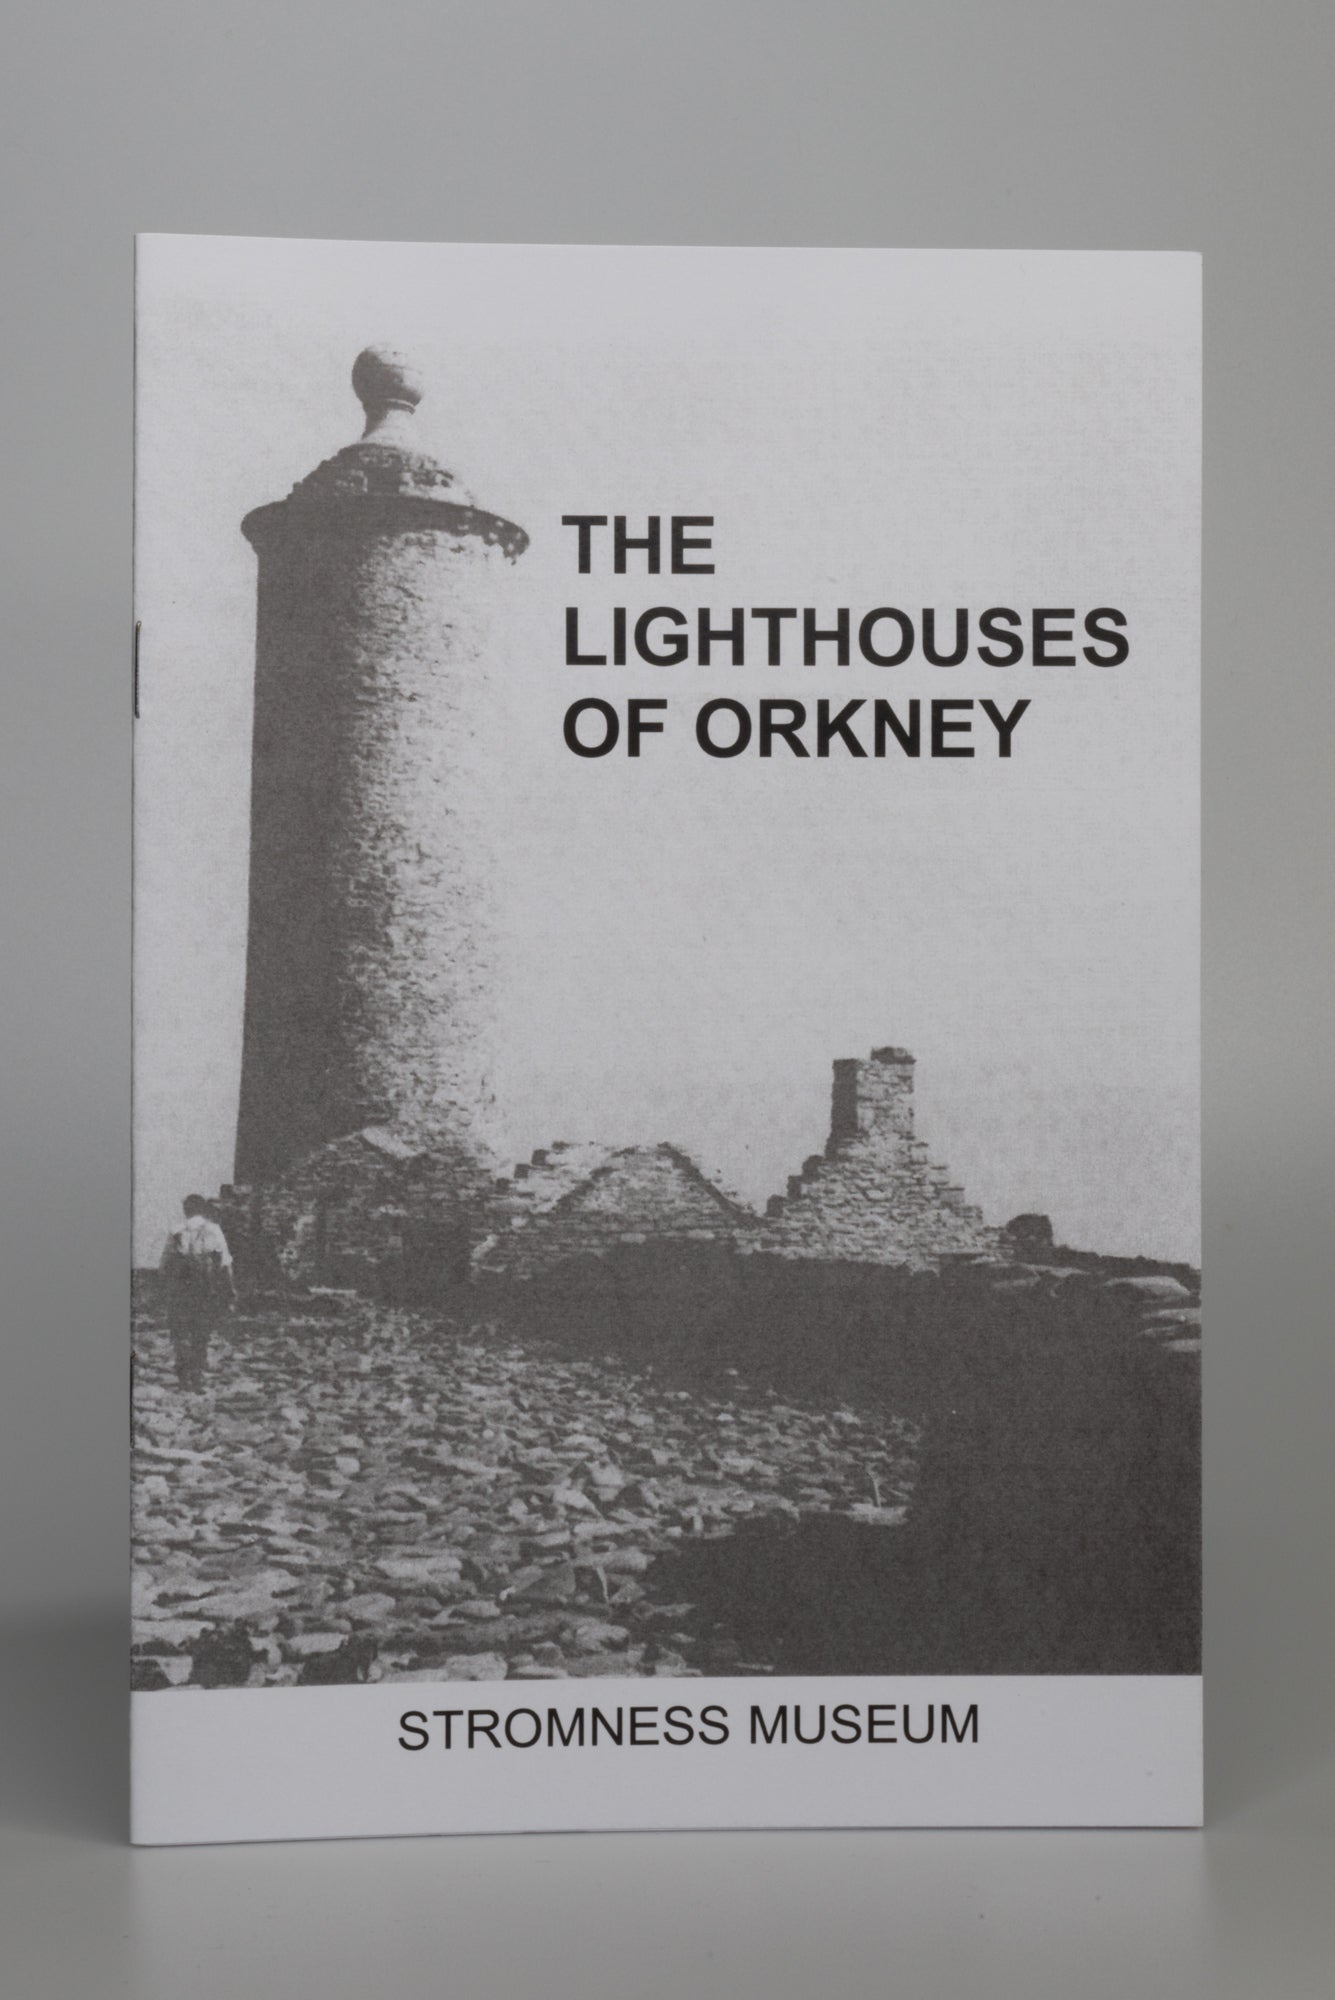 The Lighthouses of Orkney